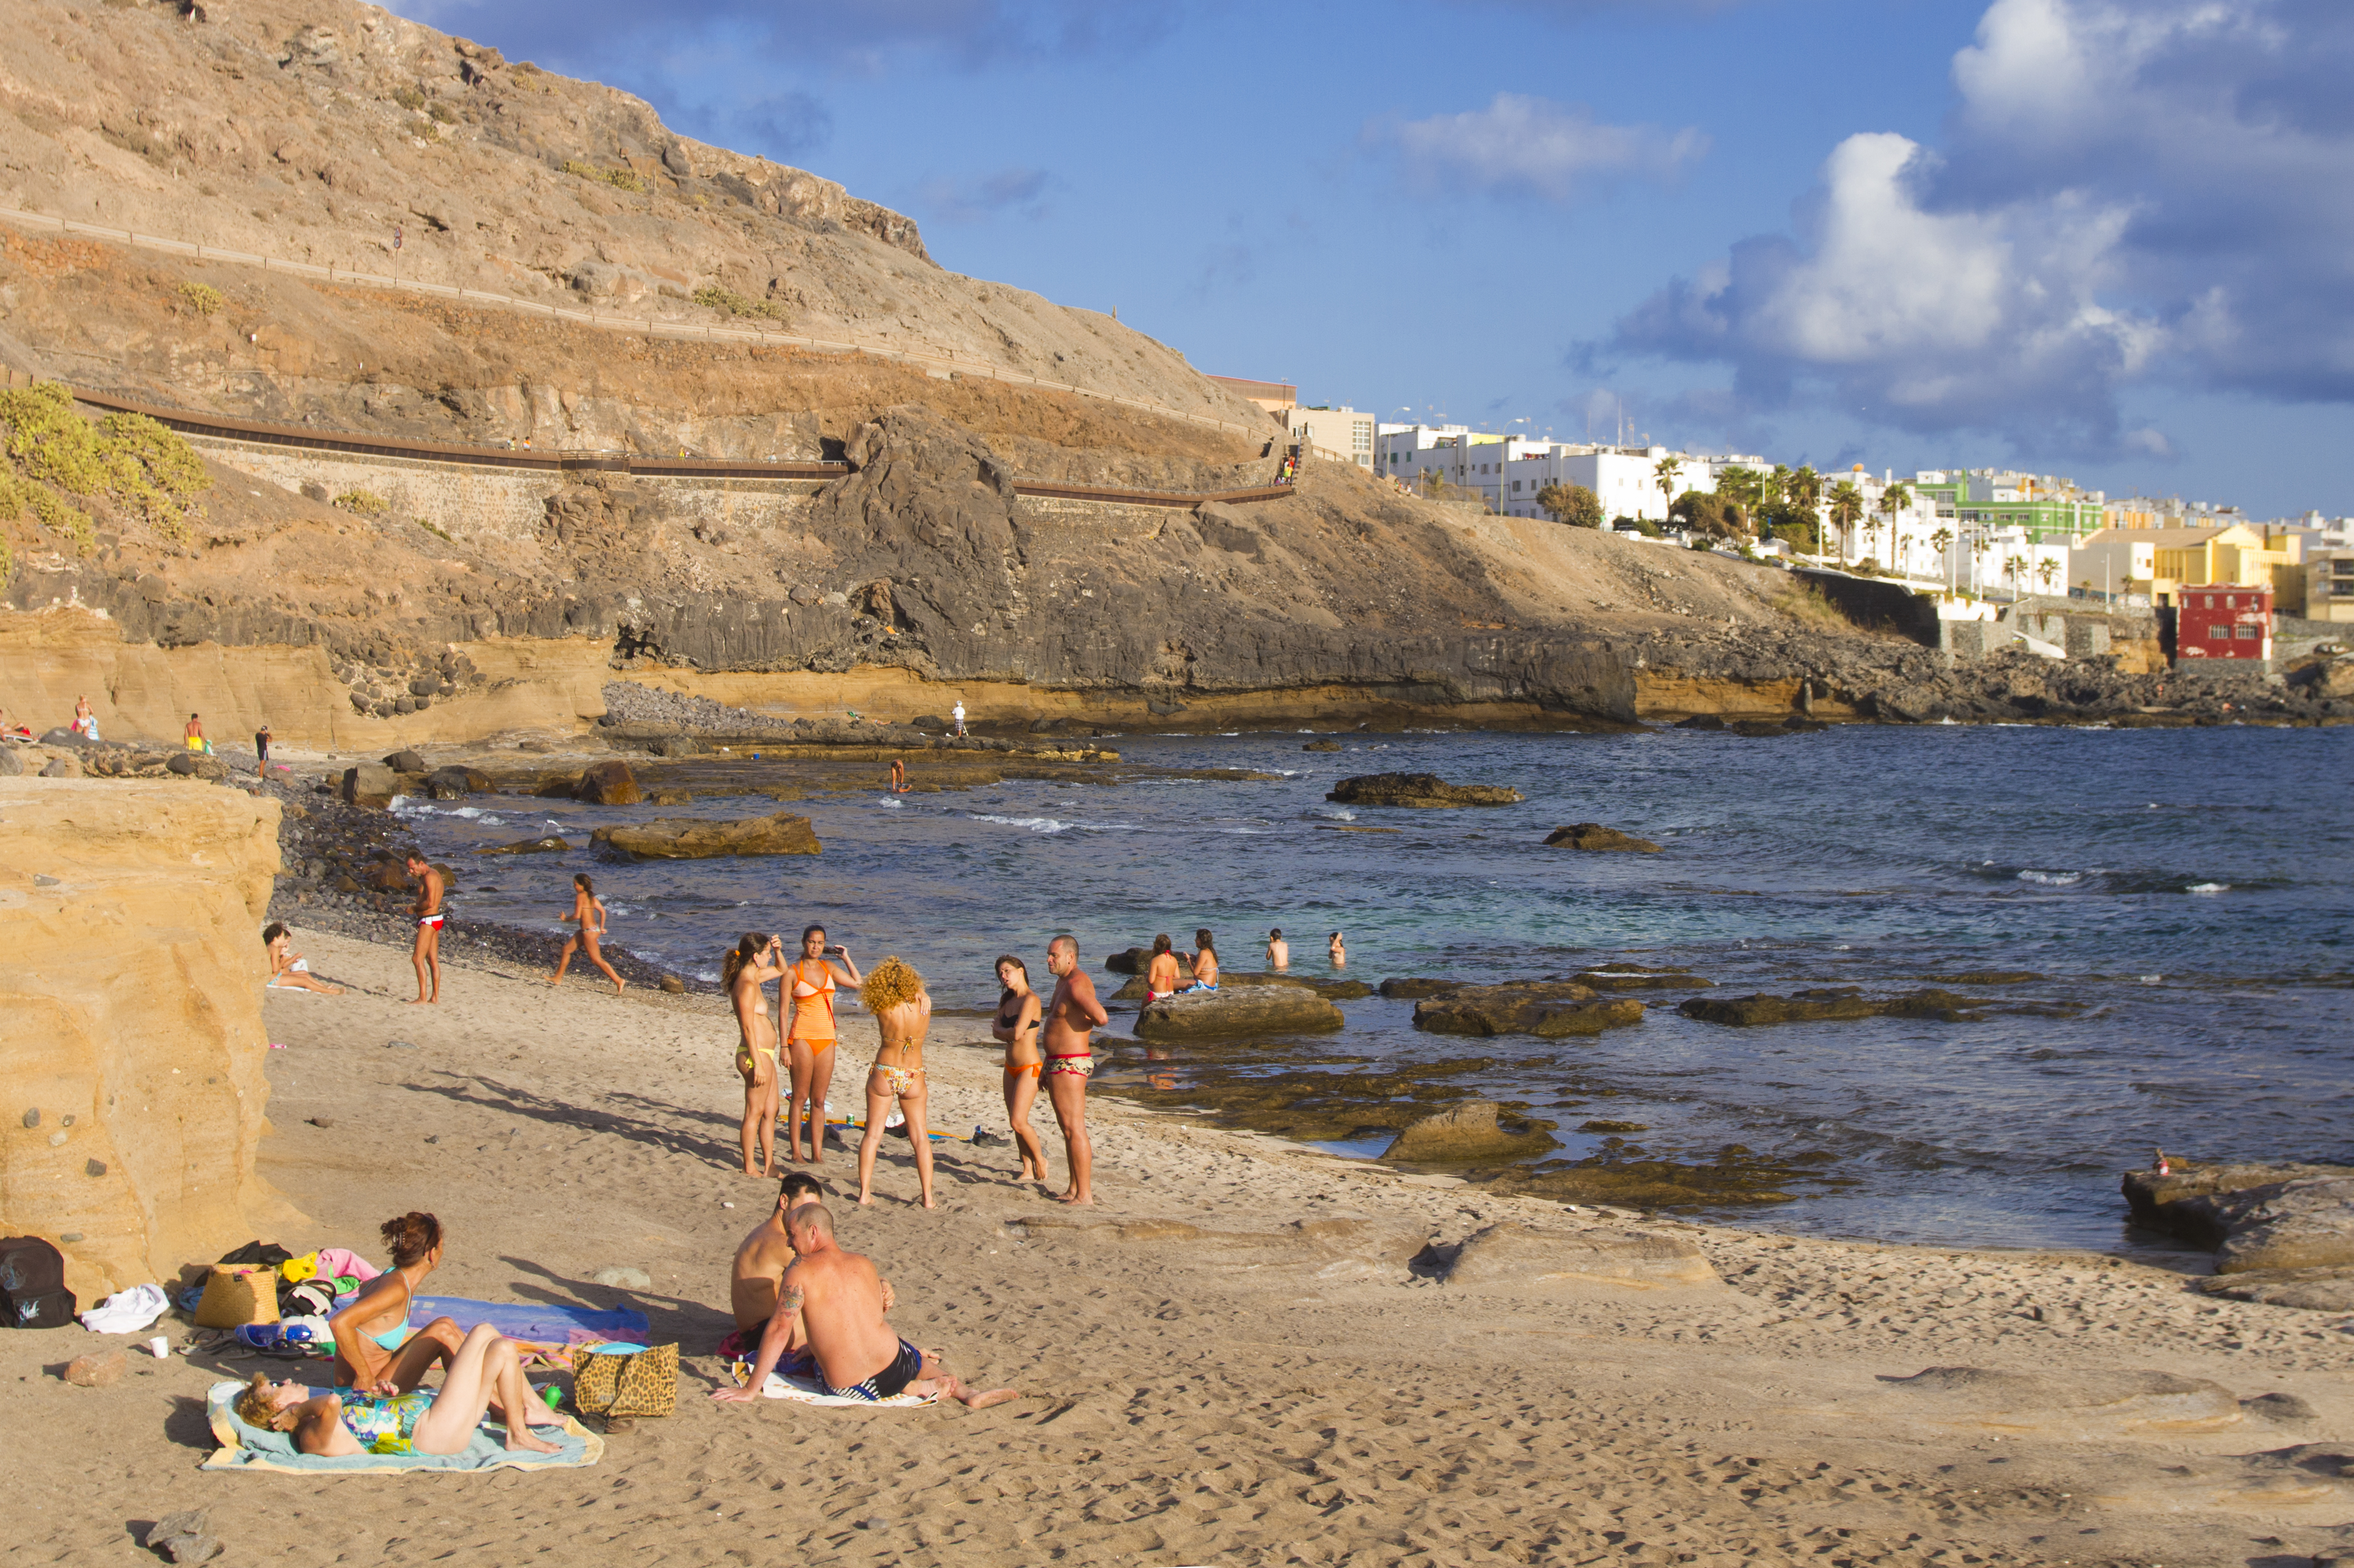 Naked beach girls pic galleries Gran Canaria Info The Top 10 Spots To Get Naked In Gran Canaria